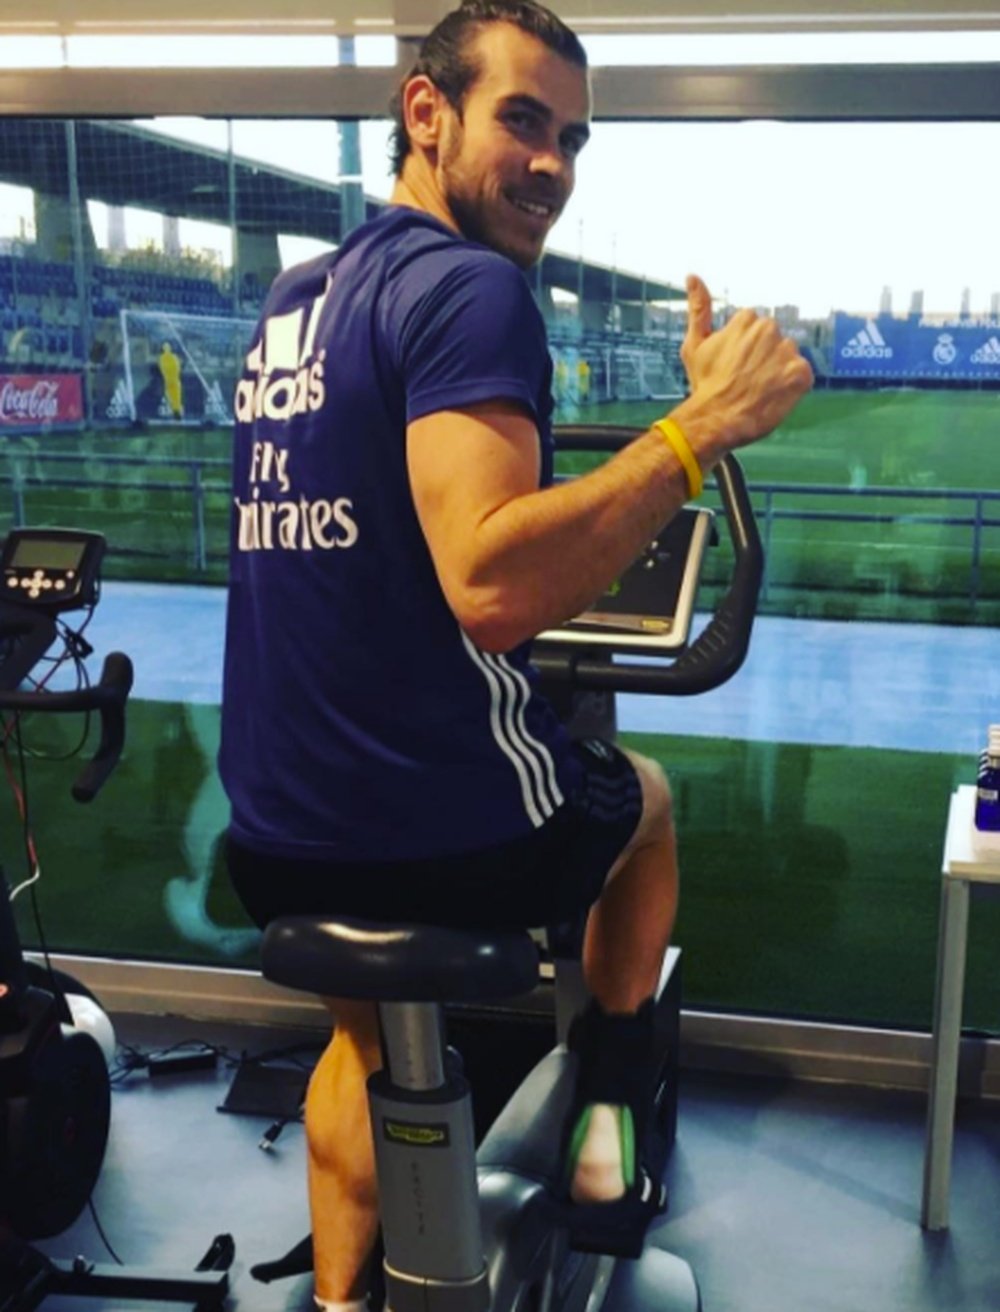 Gareth Bale recently posted this photo of him working out in rehab. Instagram